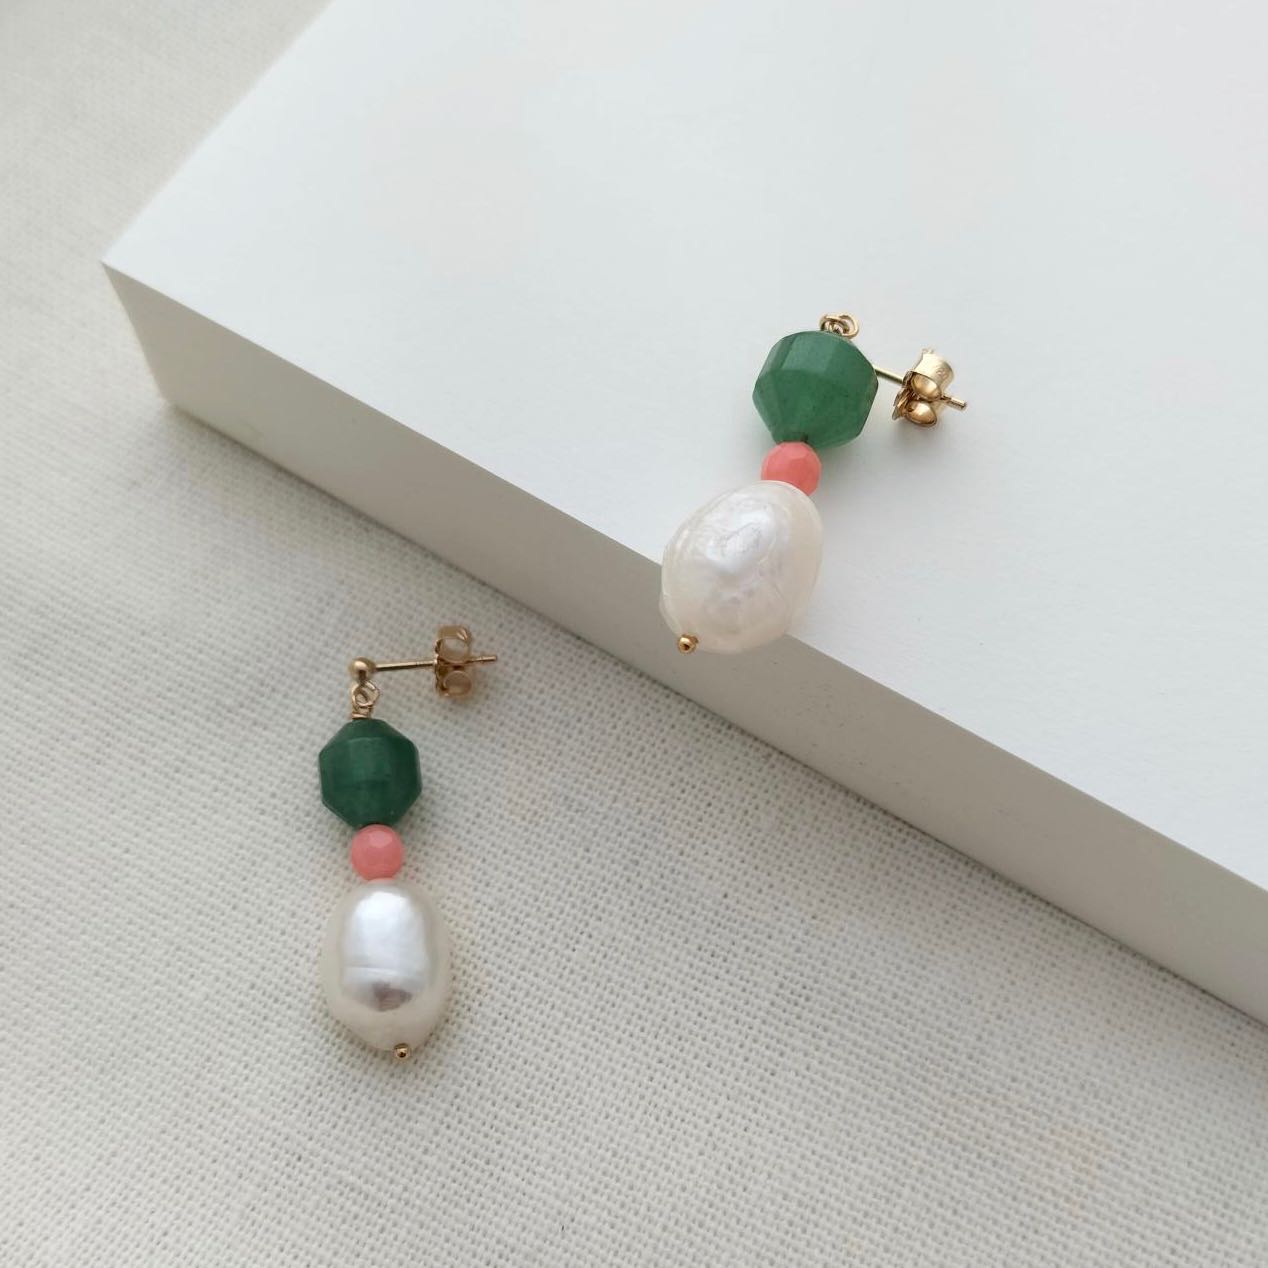 green white and pink earrings